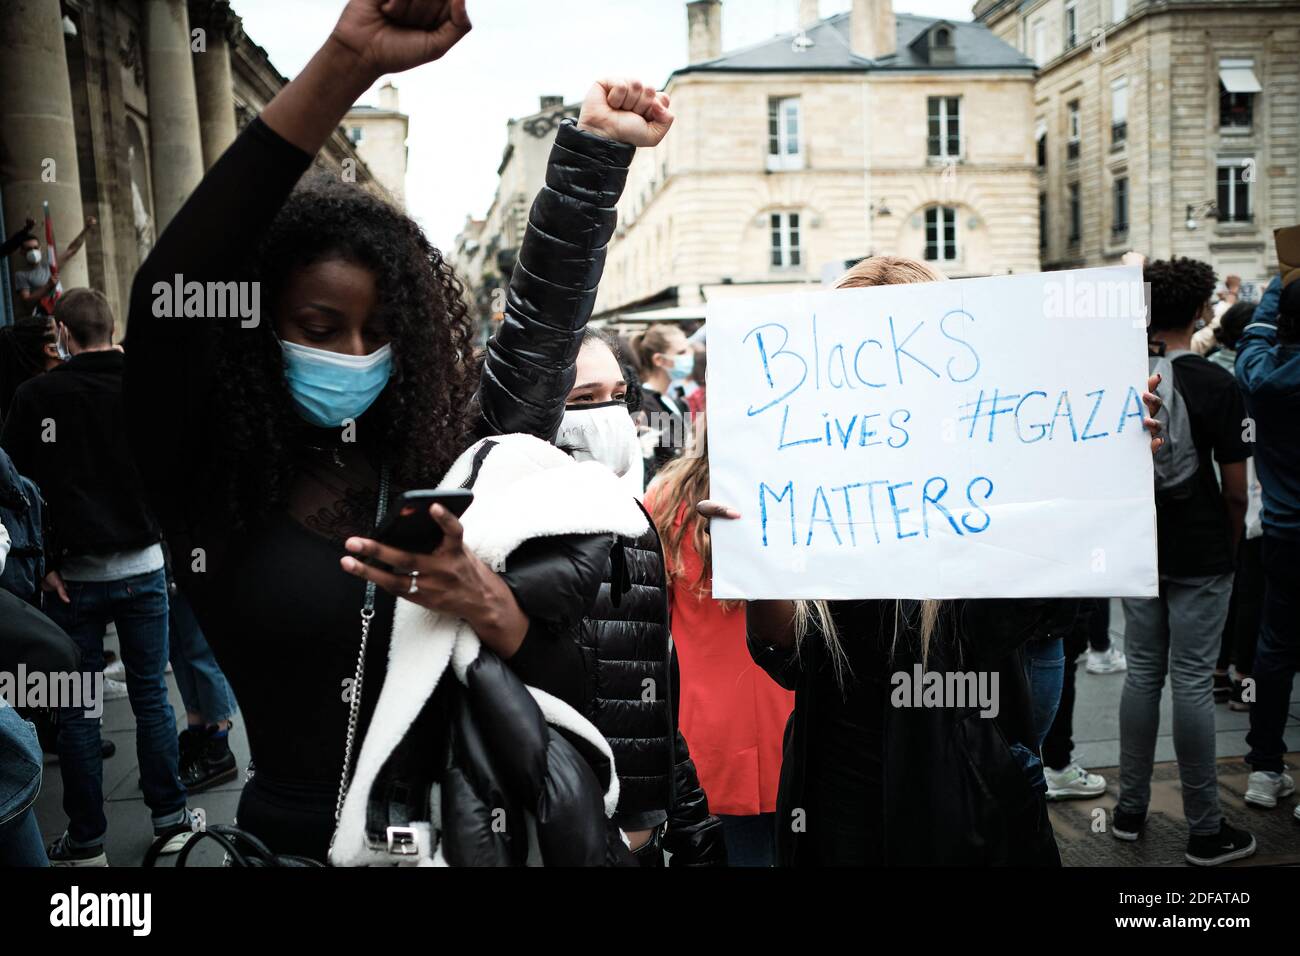 In Bordeaux, on this Wednesday, June 10, the #Blacklivesmatter